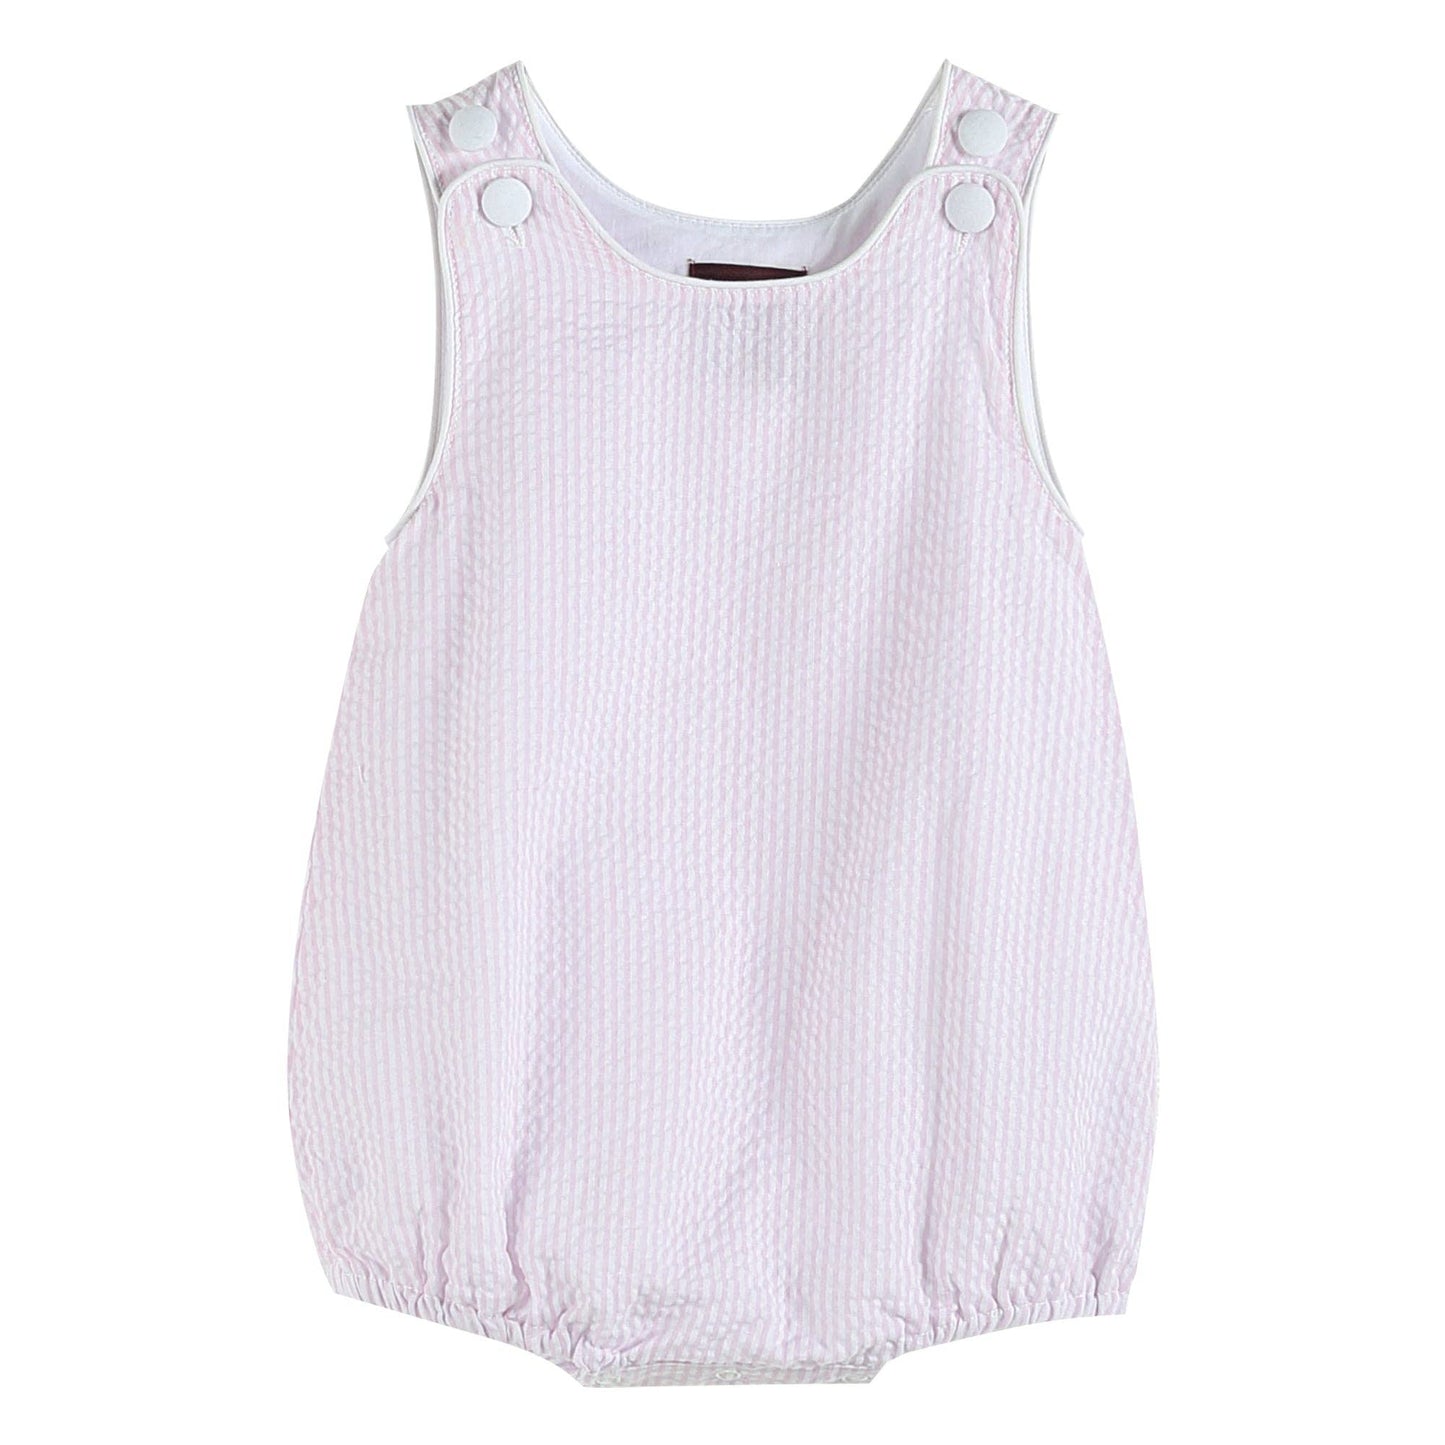 A Classic Pink Seersucker Bubble Romper with buttons on the front by Lil Cactus.